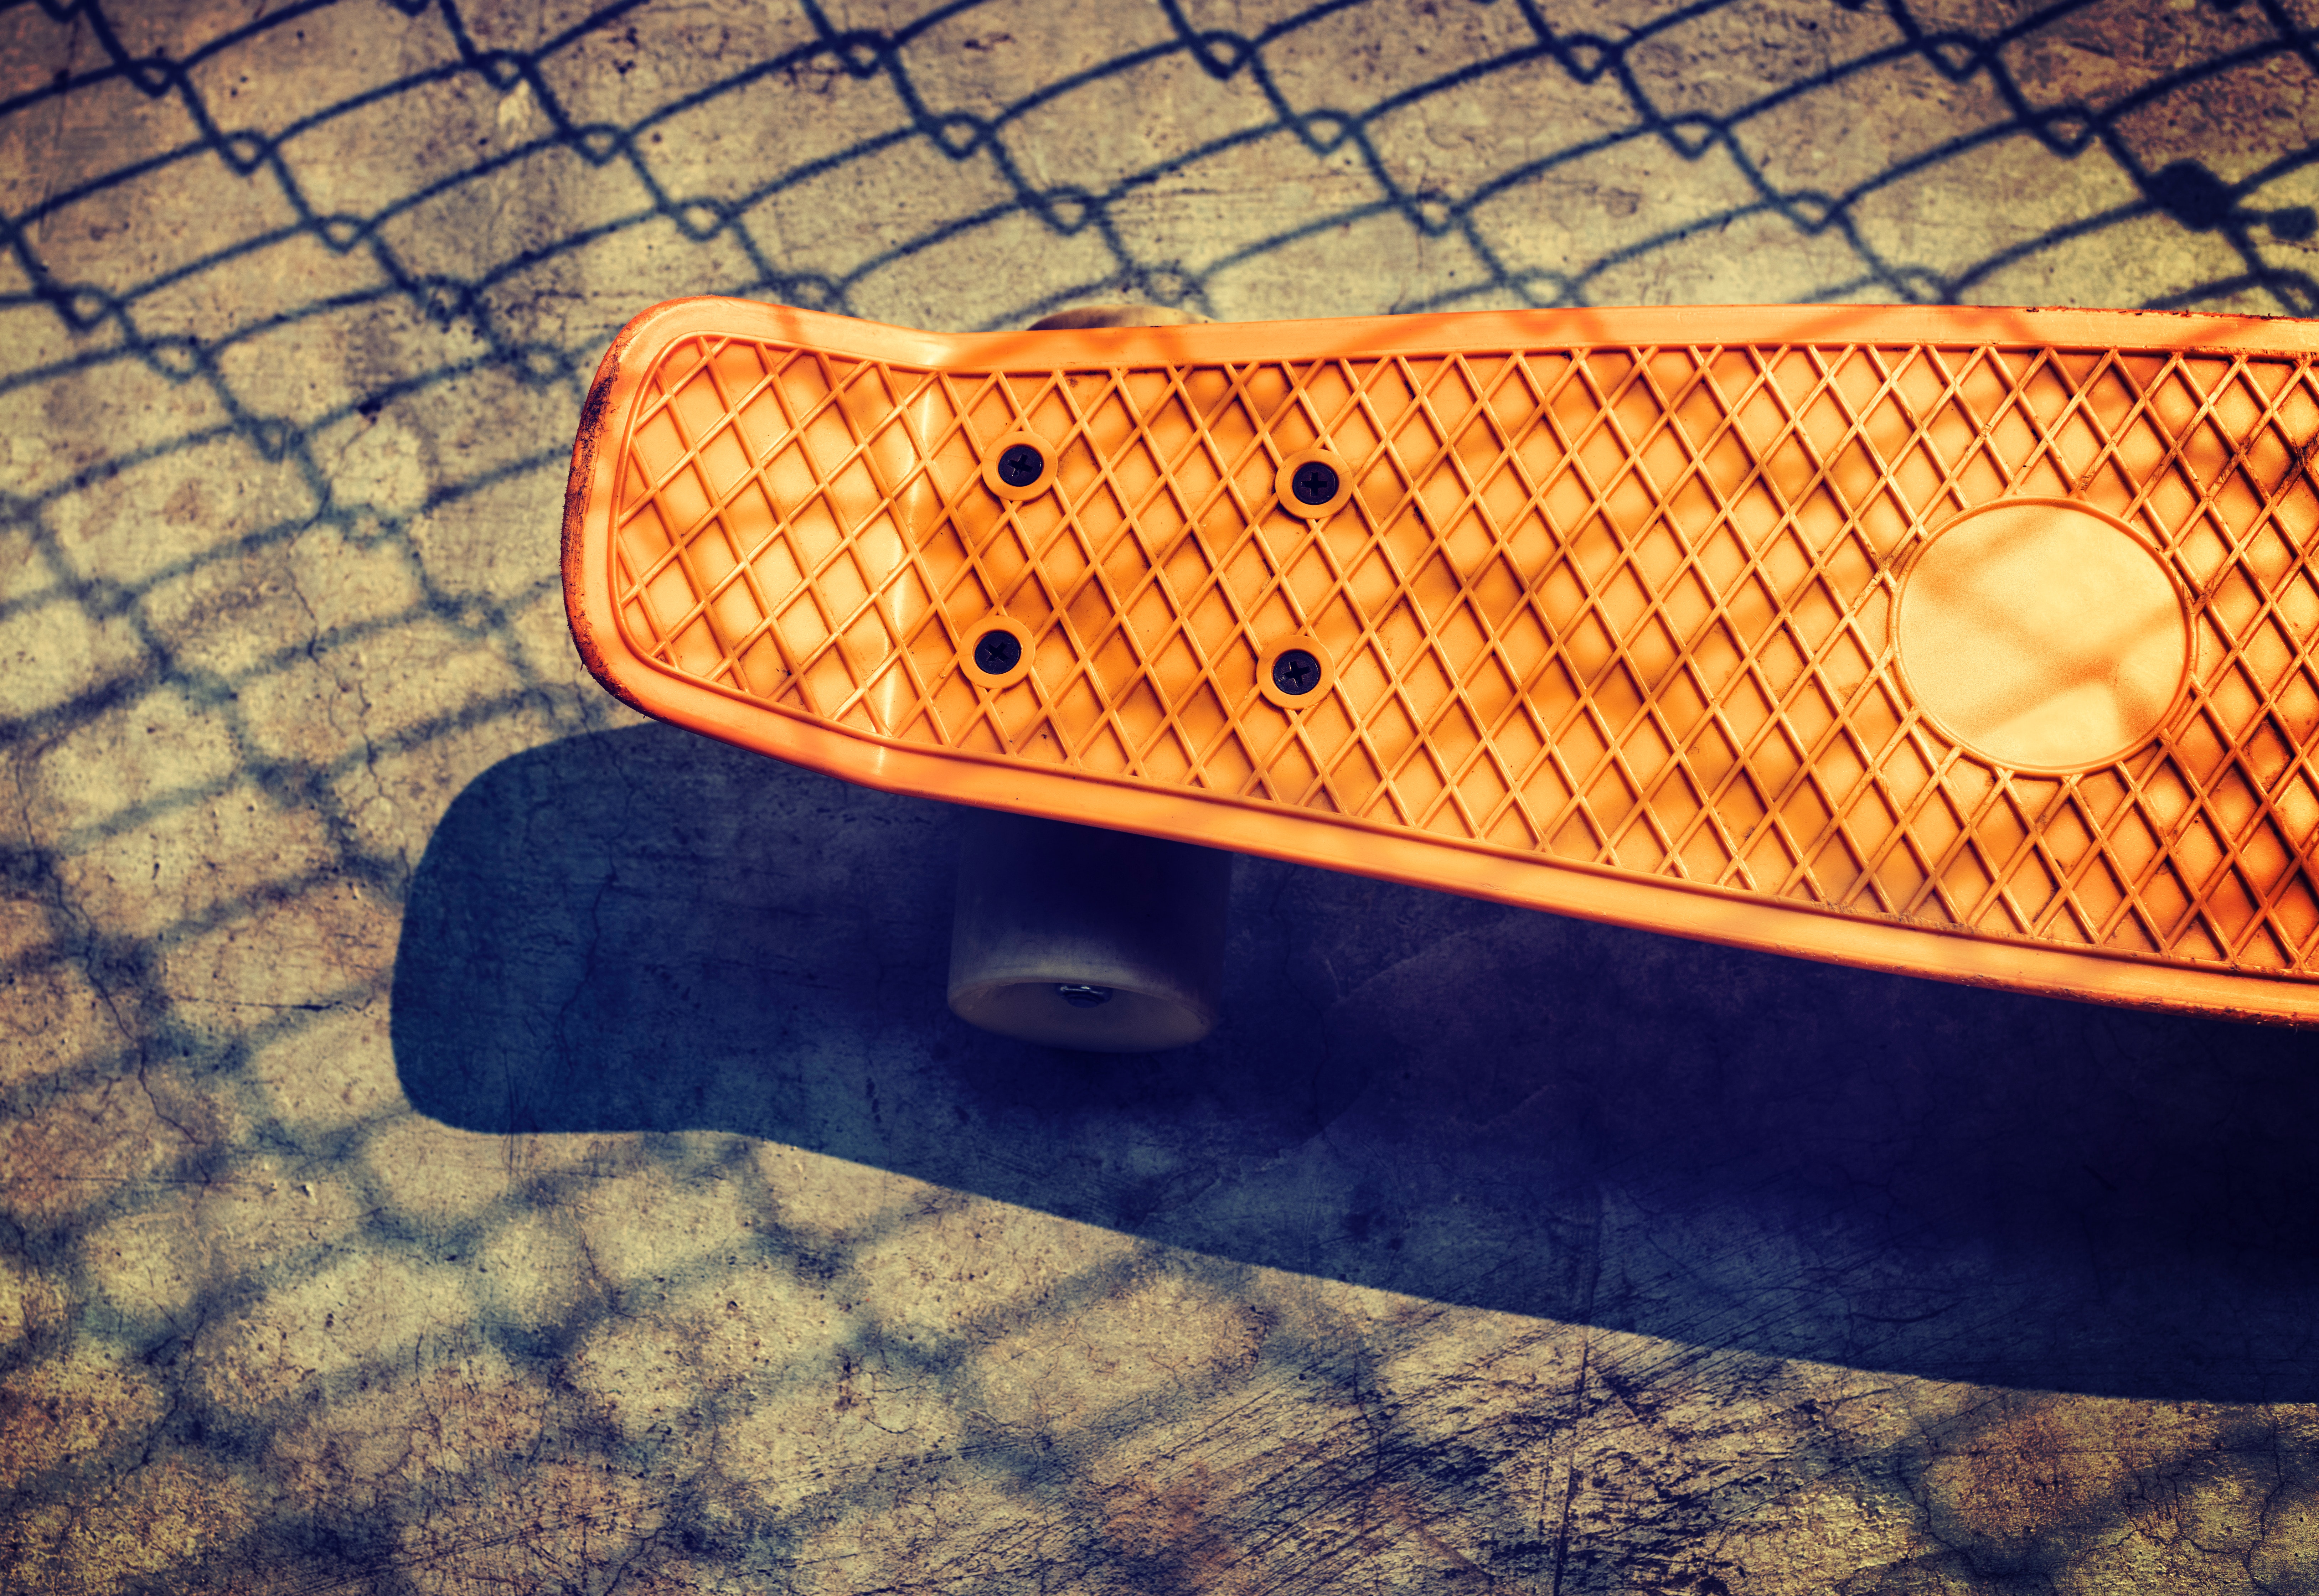 High Angle View of a Skateboard, Activity, Recreation, Sunlight, Summer, HQ Photo